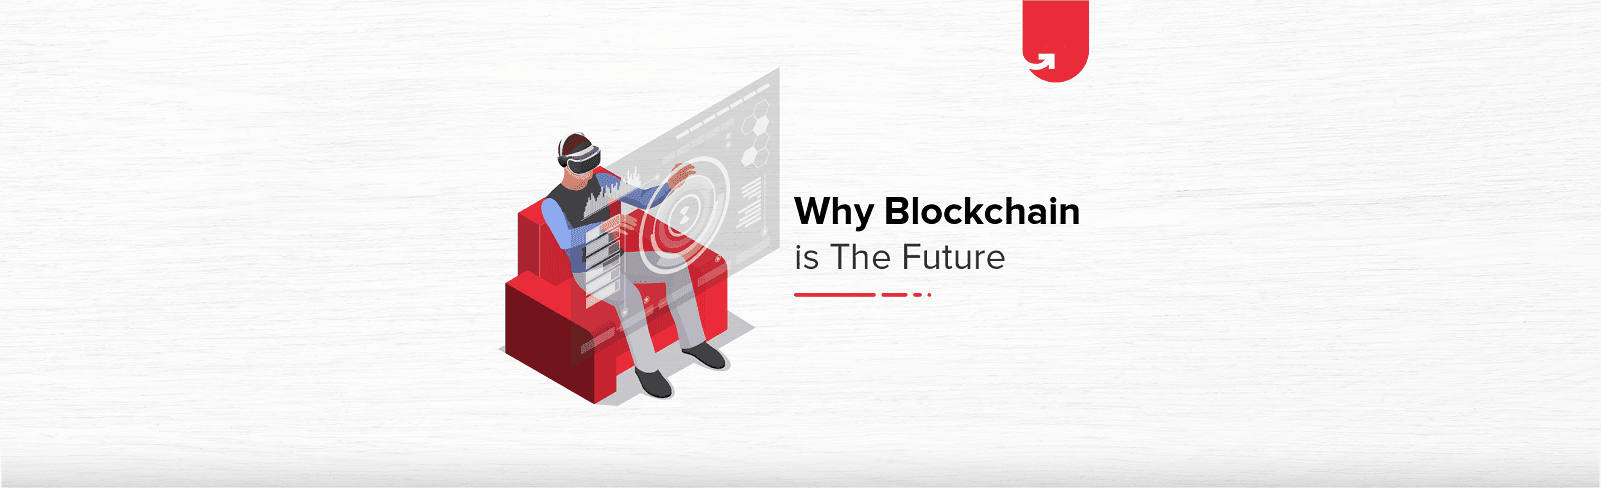 8 Reasons Why Blockchain Technology Is the Future